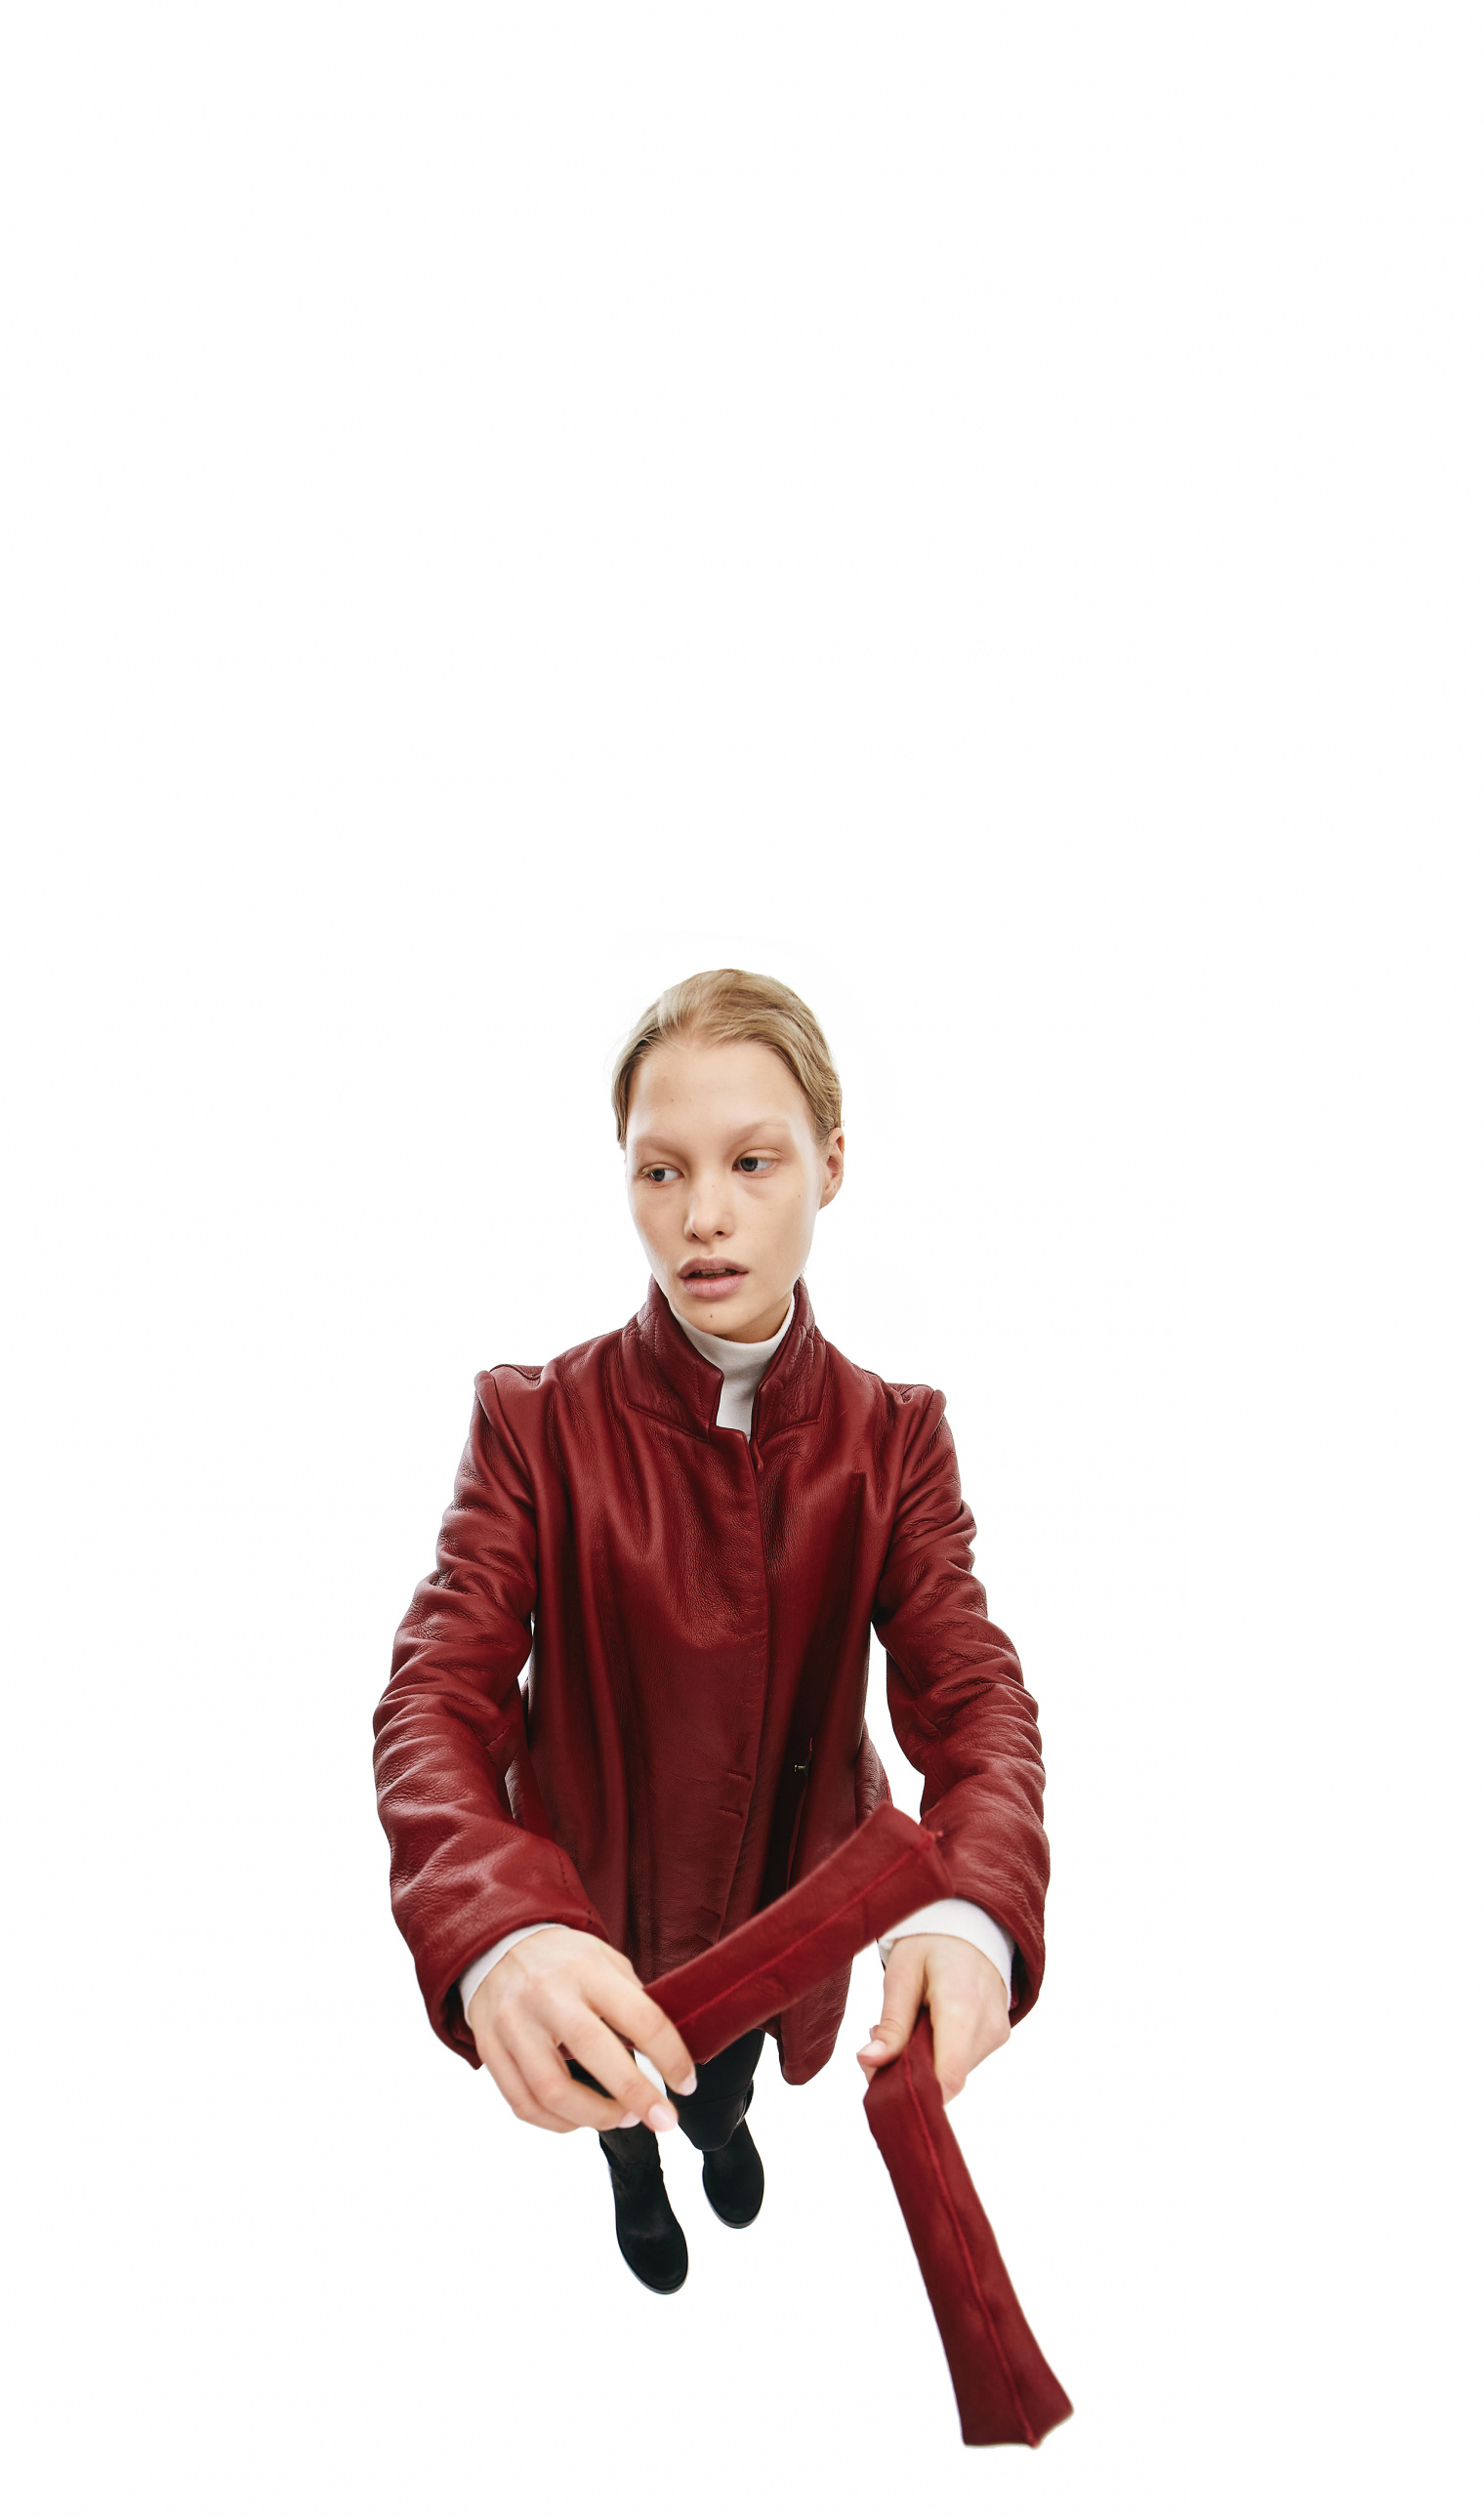 Isaac Sellam Reguliere Burgundy Jacket with Belt